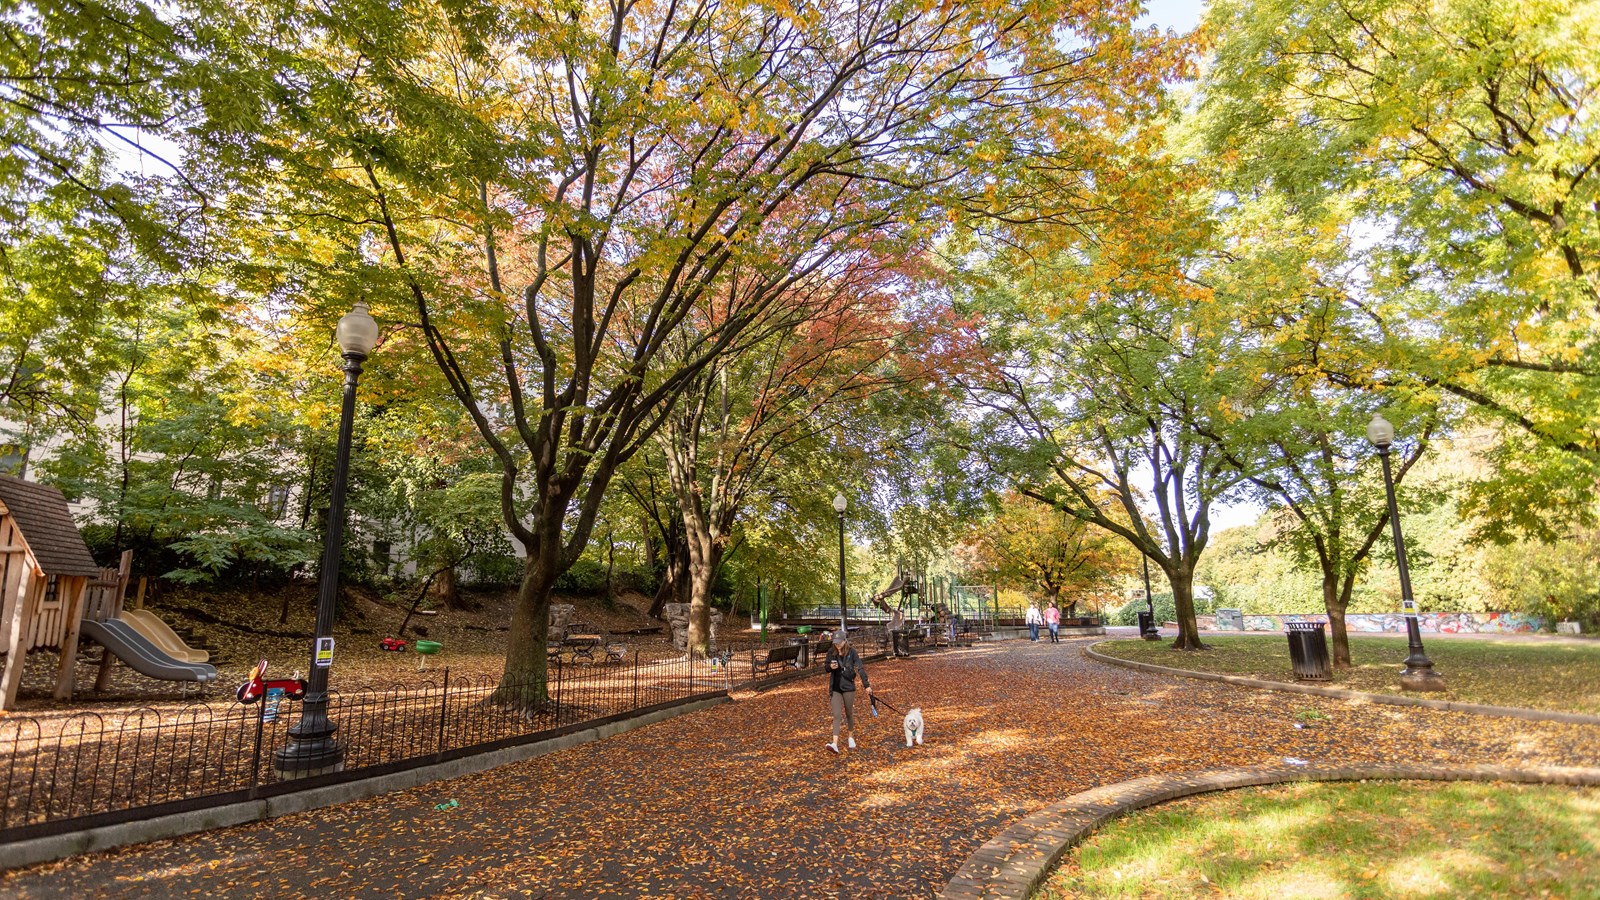 A woman walks a dog on a path shaded by colorful autumn trees.